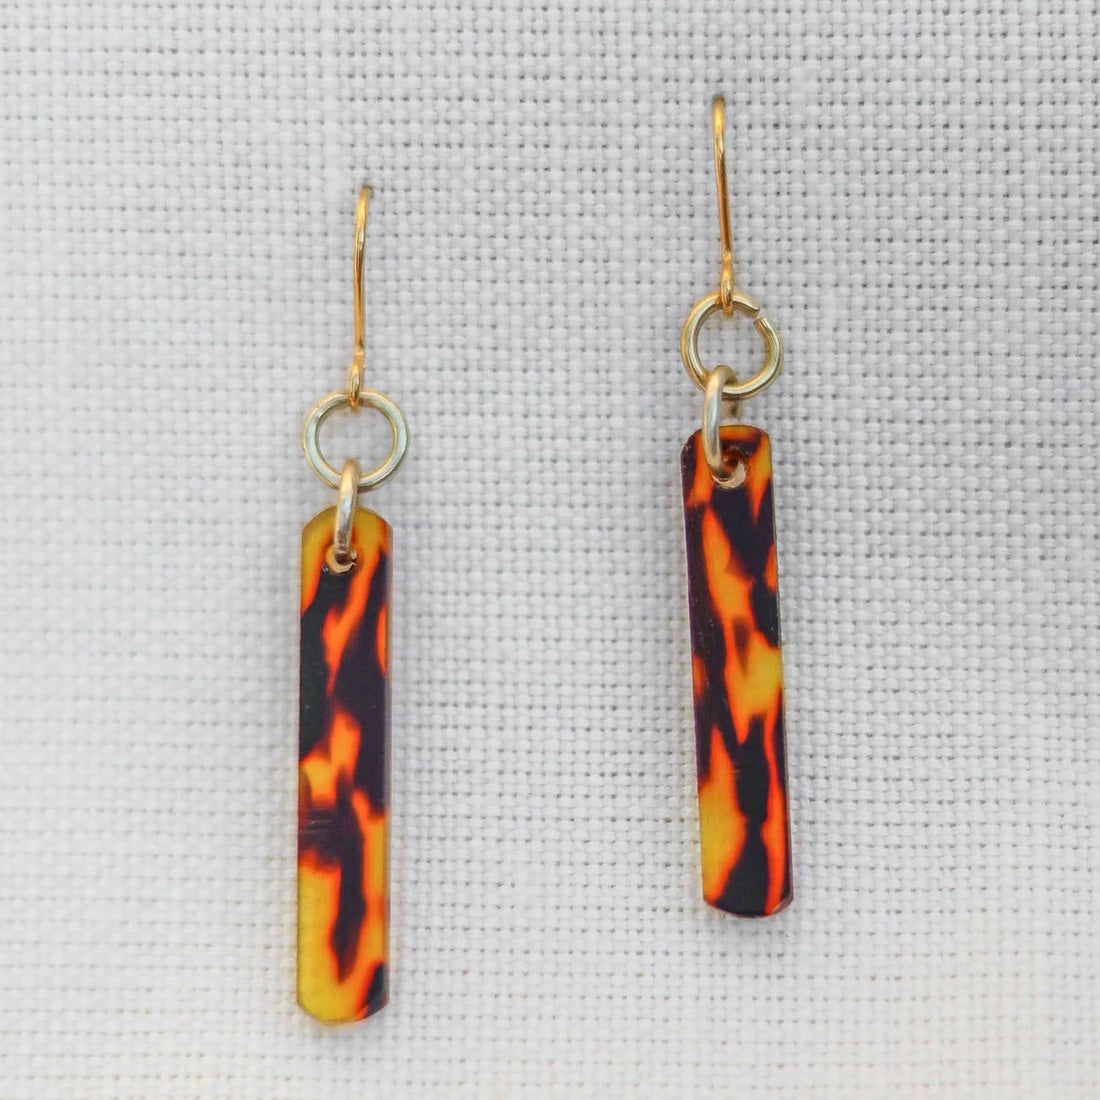 Long thin earrings made with acetate, gold hook fastenings